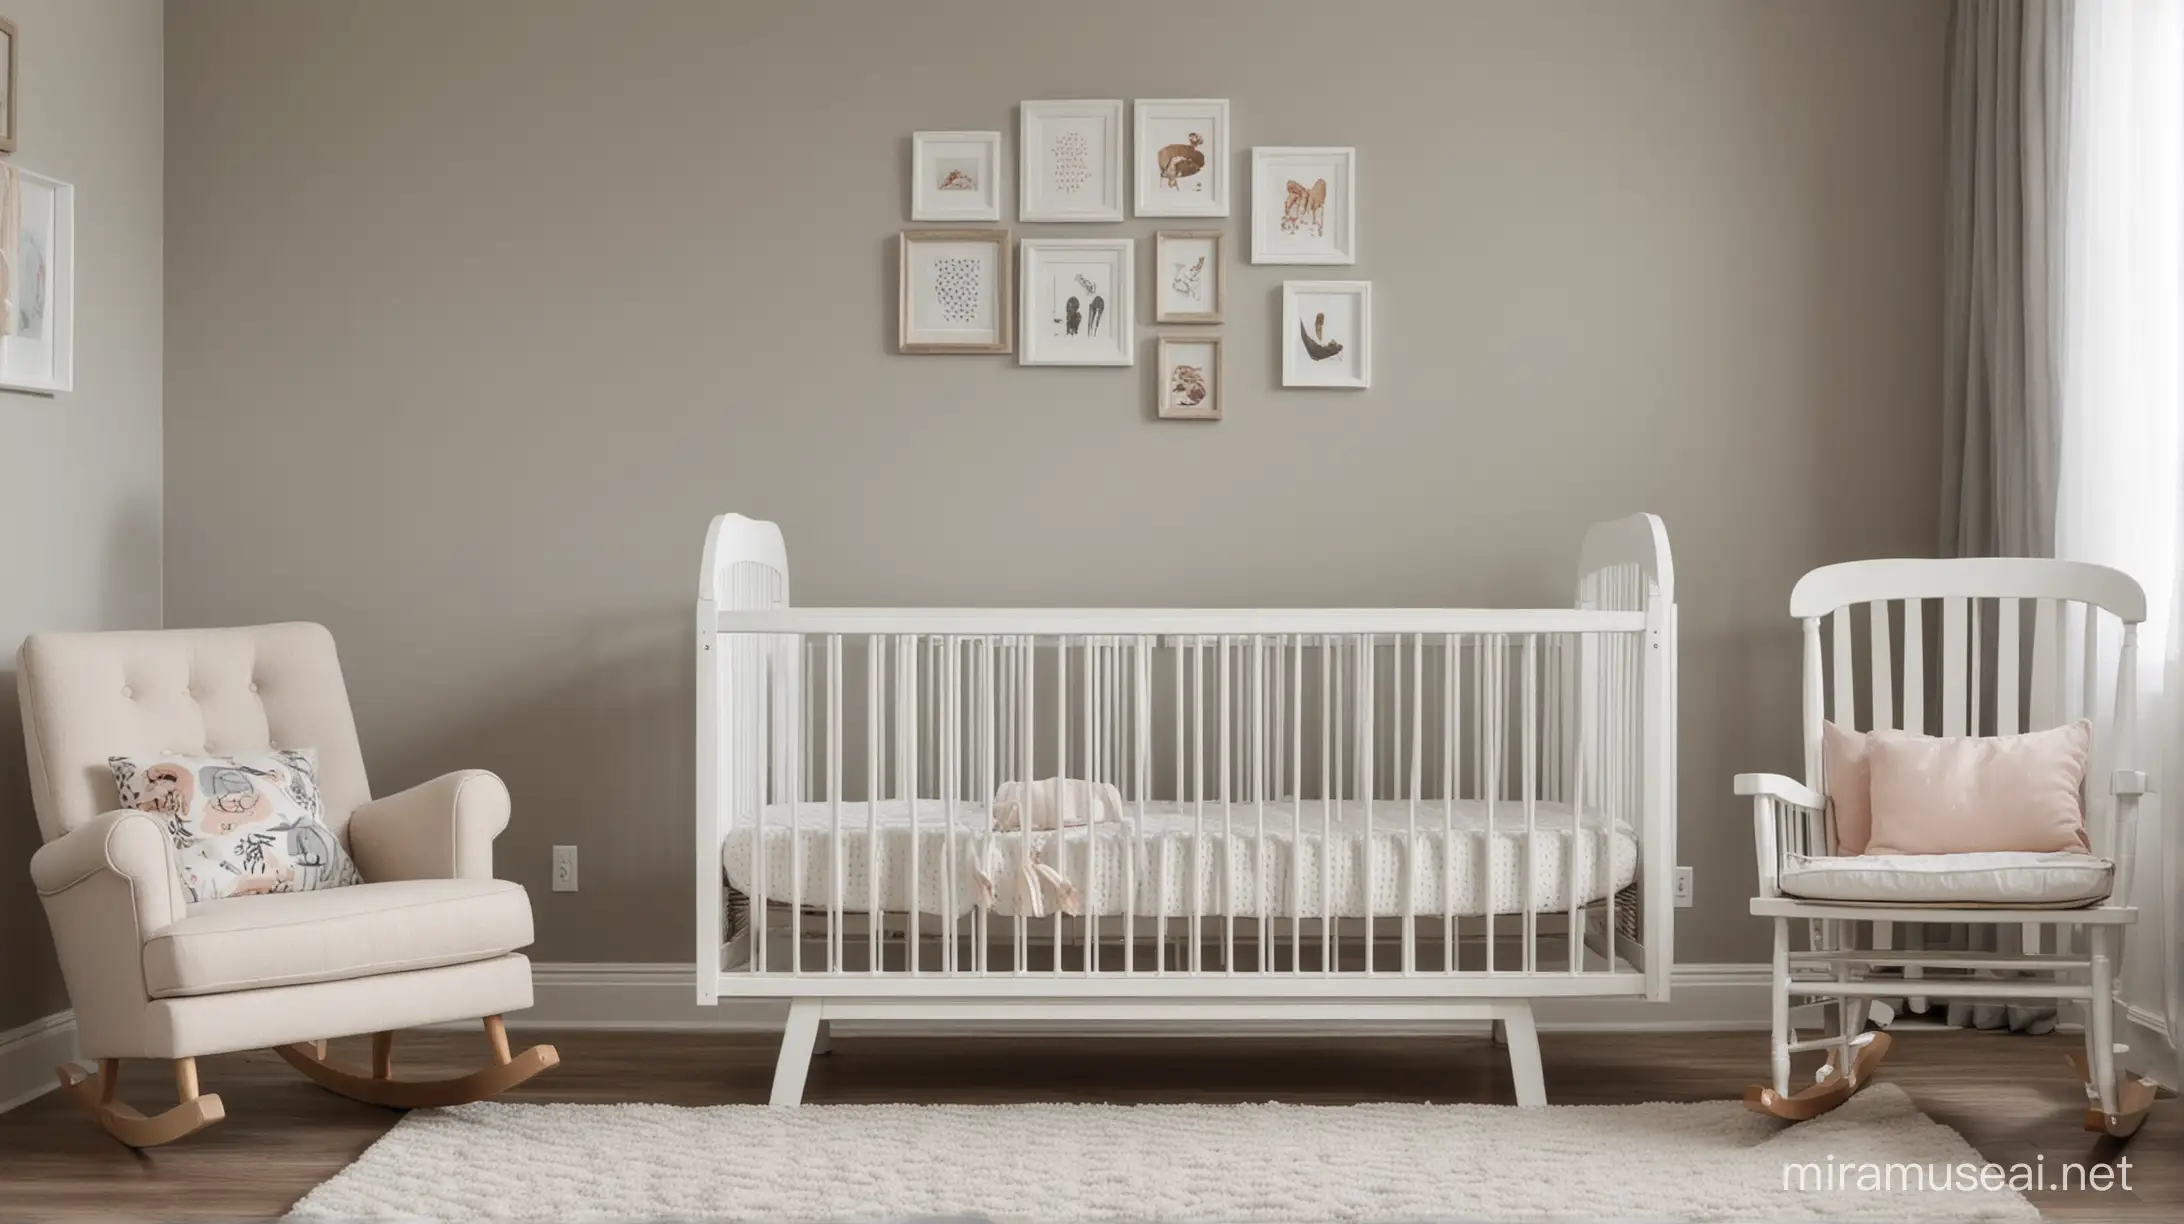 Cozy Nursery Room with Crib and Rocking Chair